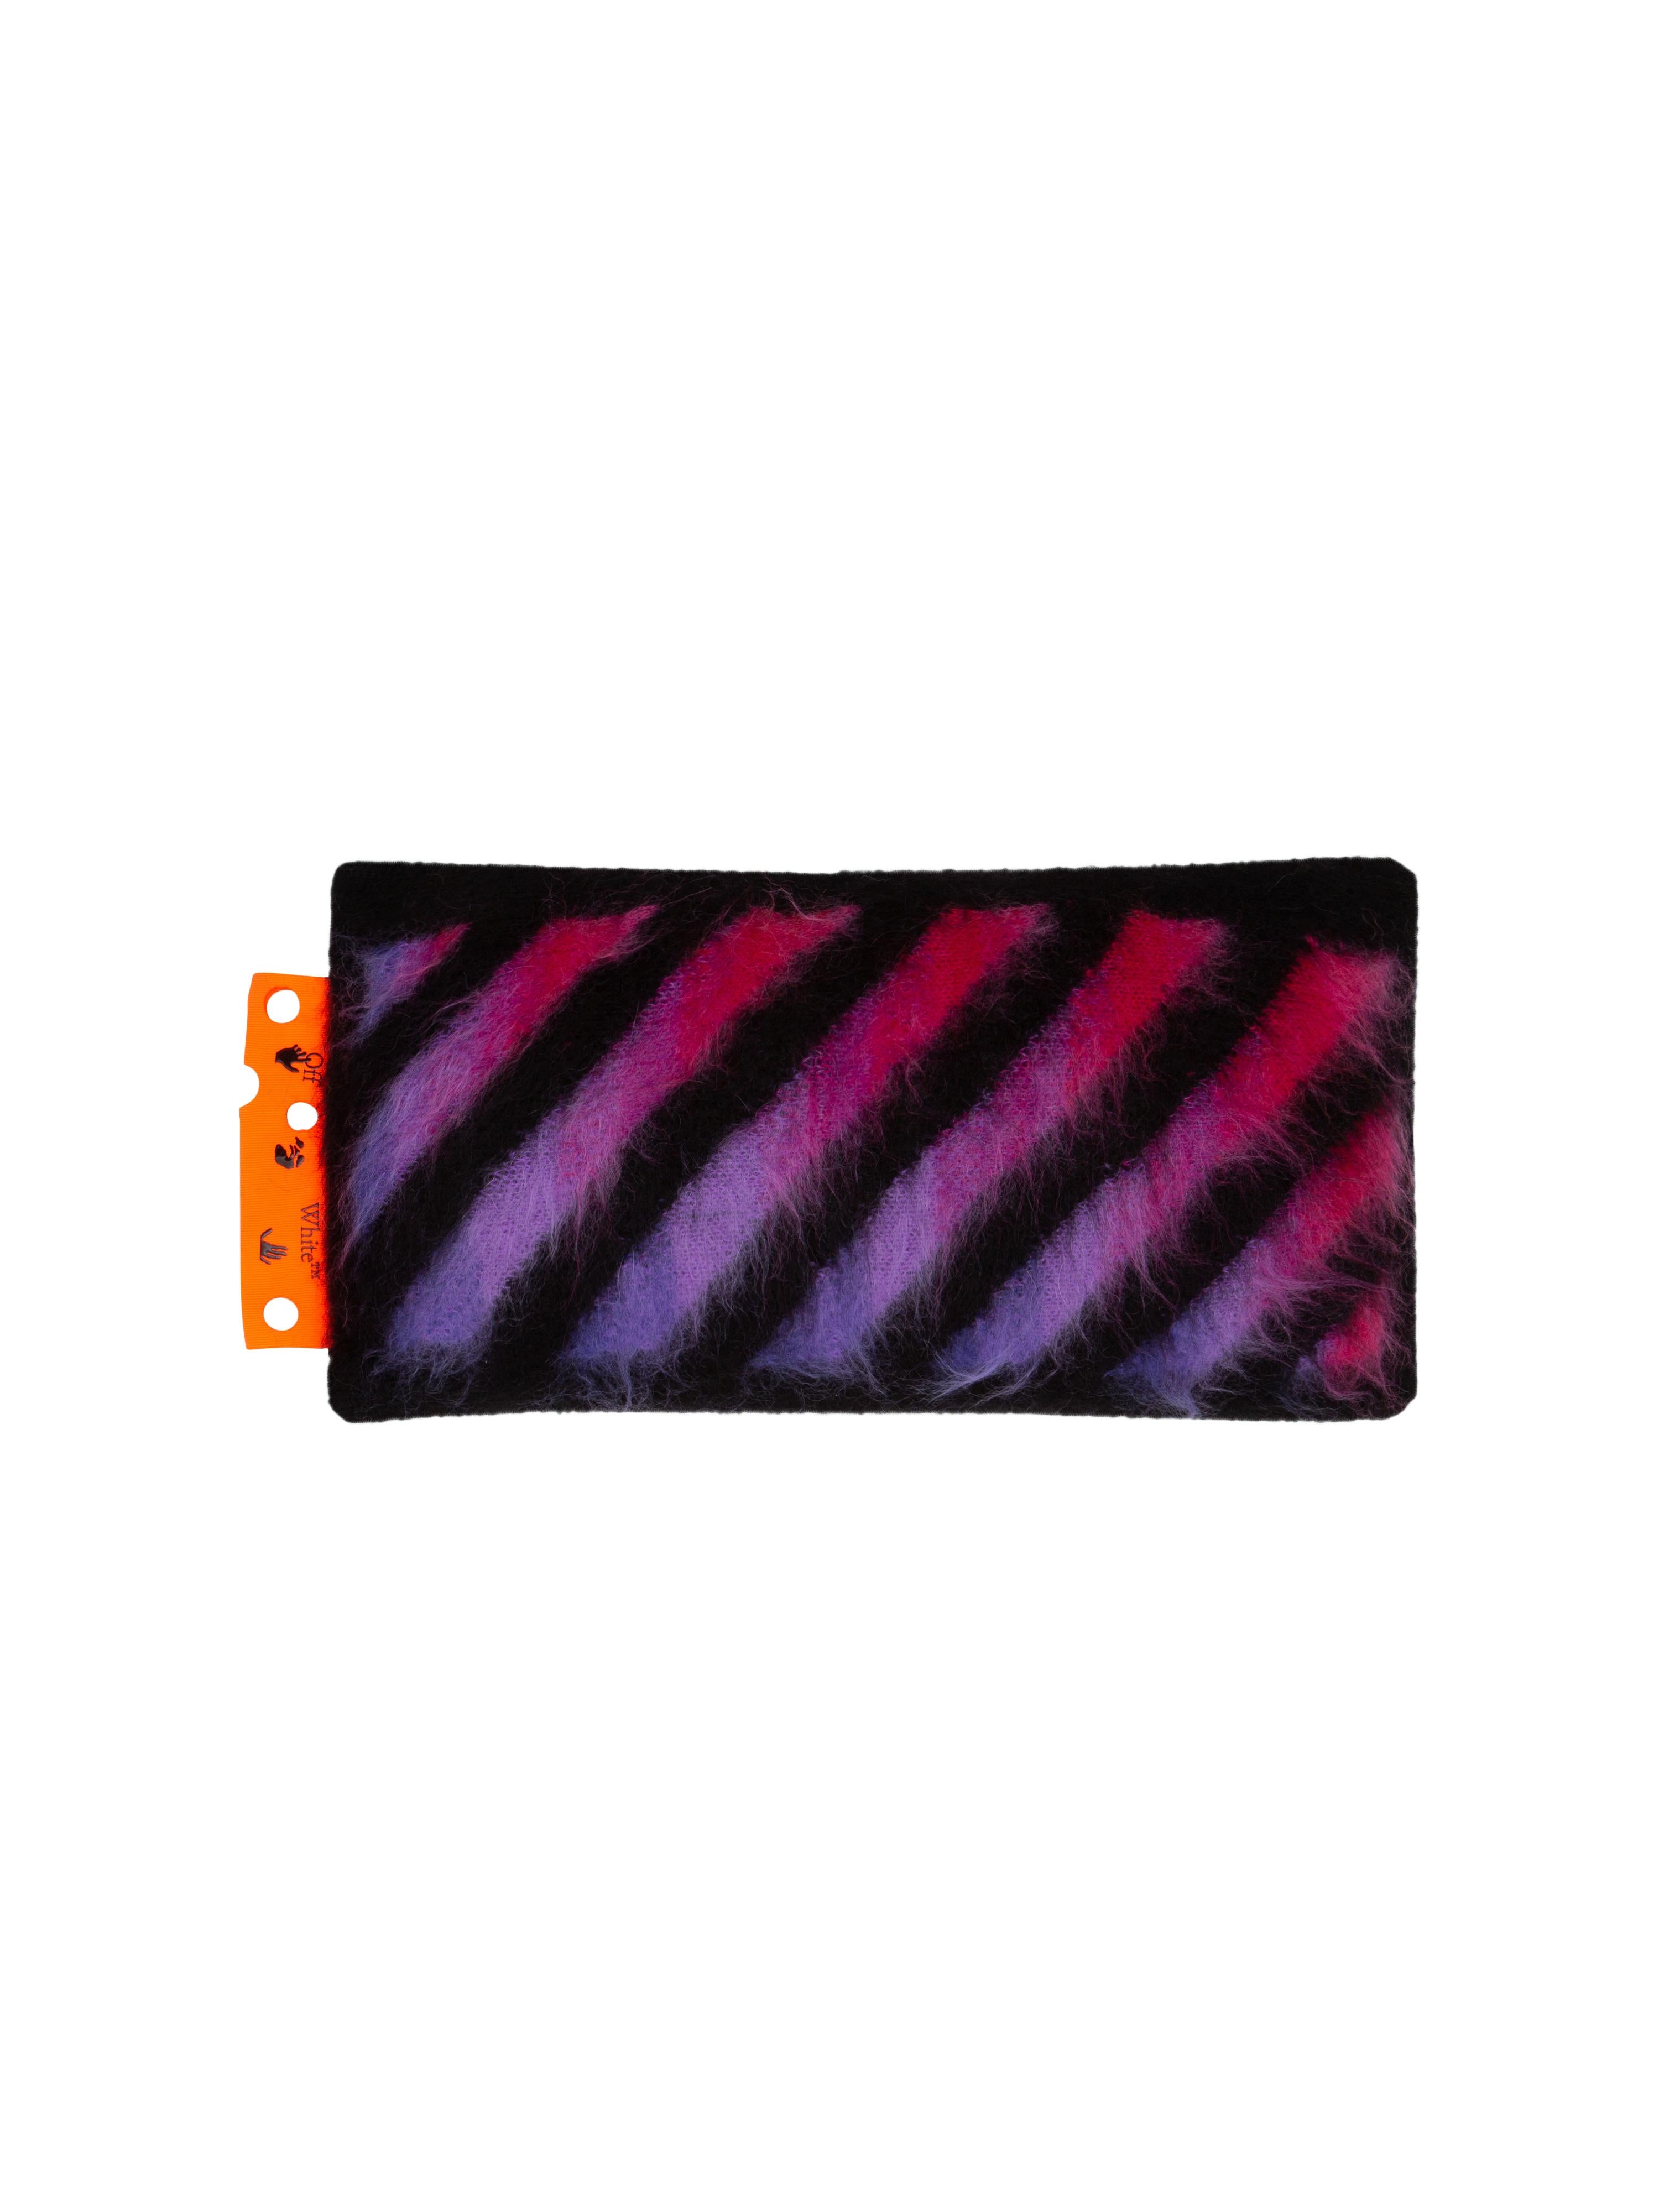 Brushed mohair Boudoir, Long pillow with big gradient arrow, pop colors variations
By Virgil Abloh
Dimensions: 50 W x 25 H
This item is only available to be purchased and shipped to the United States.